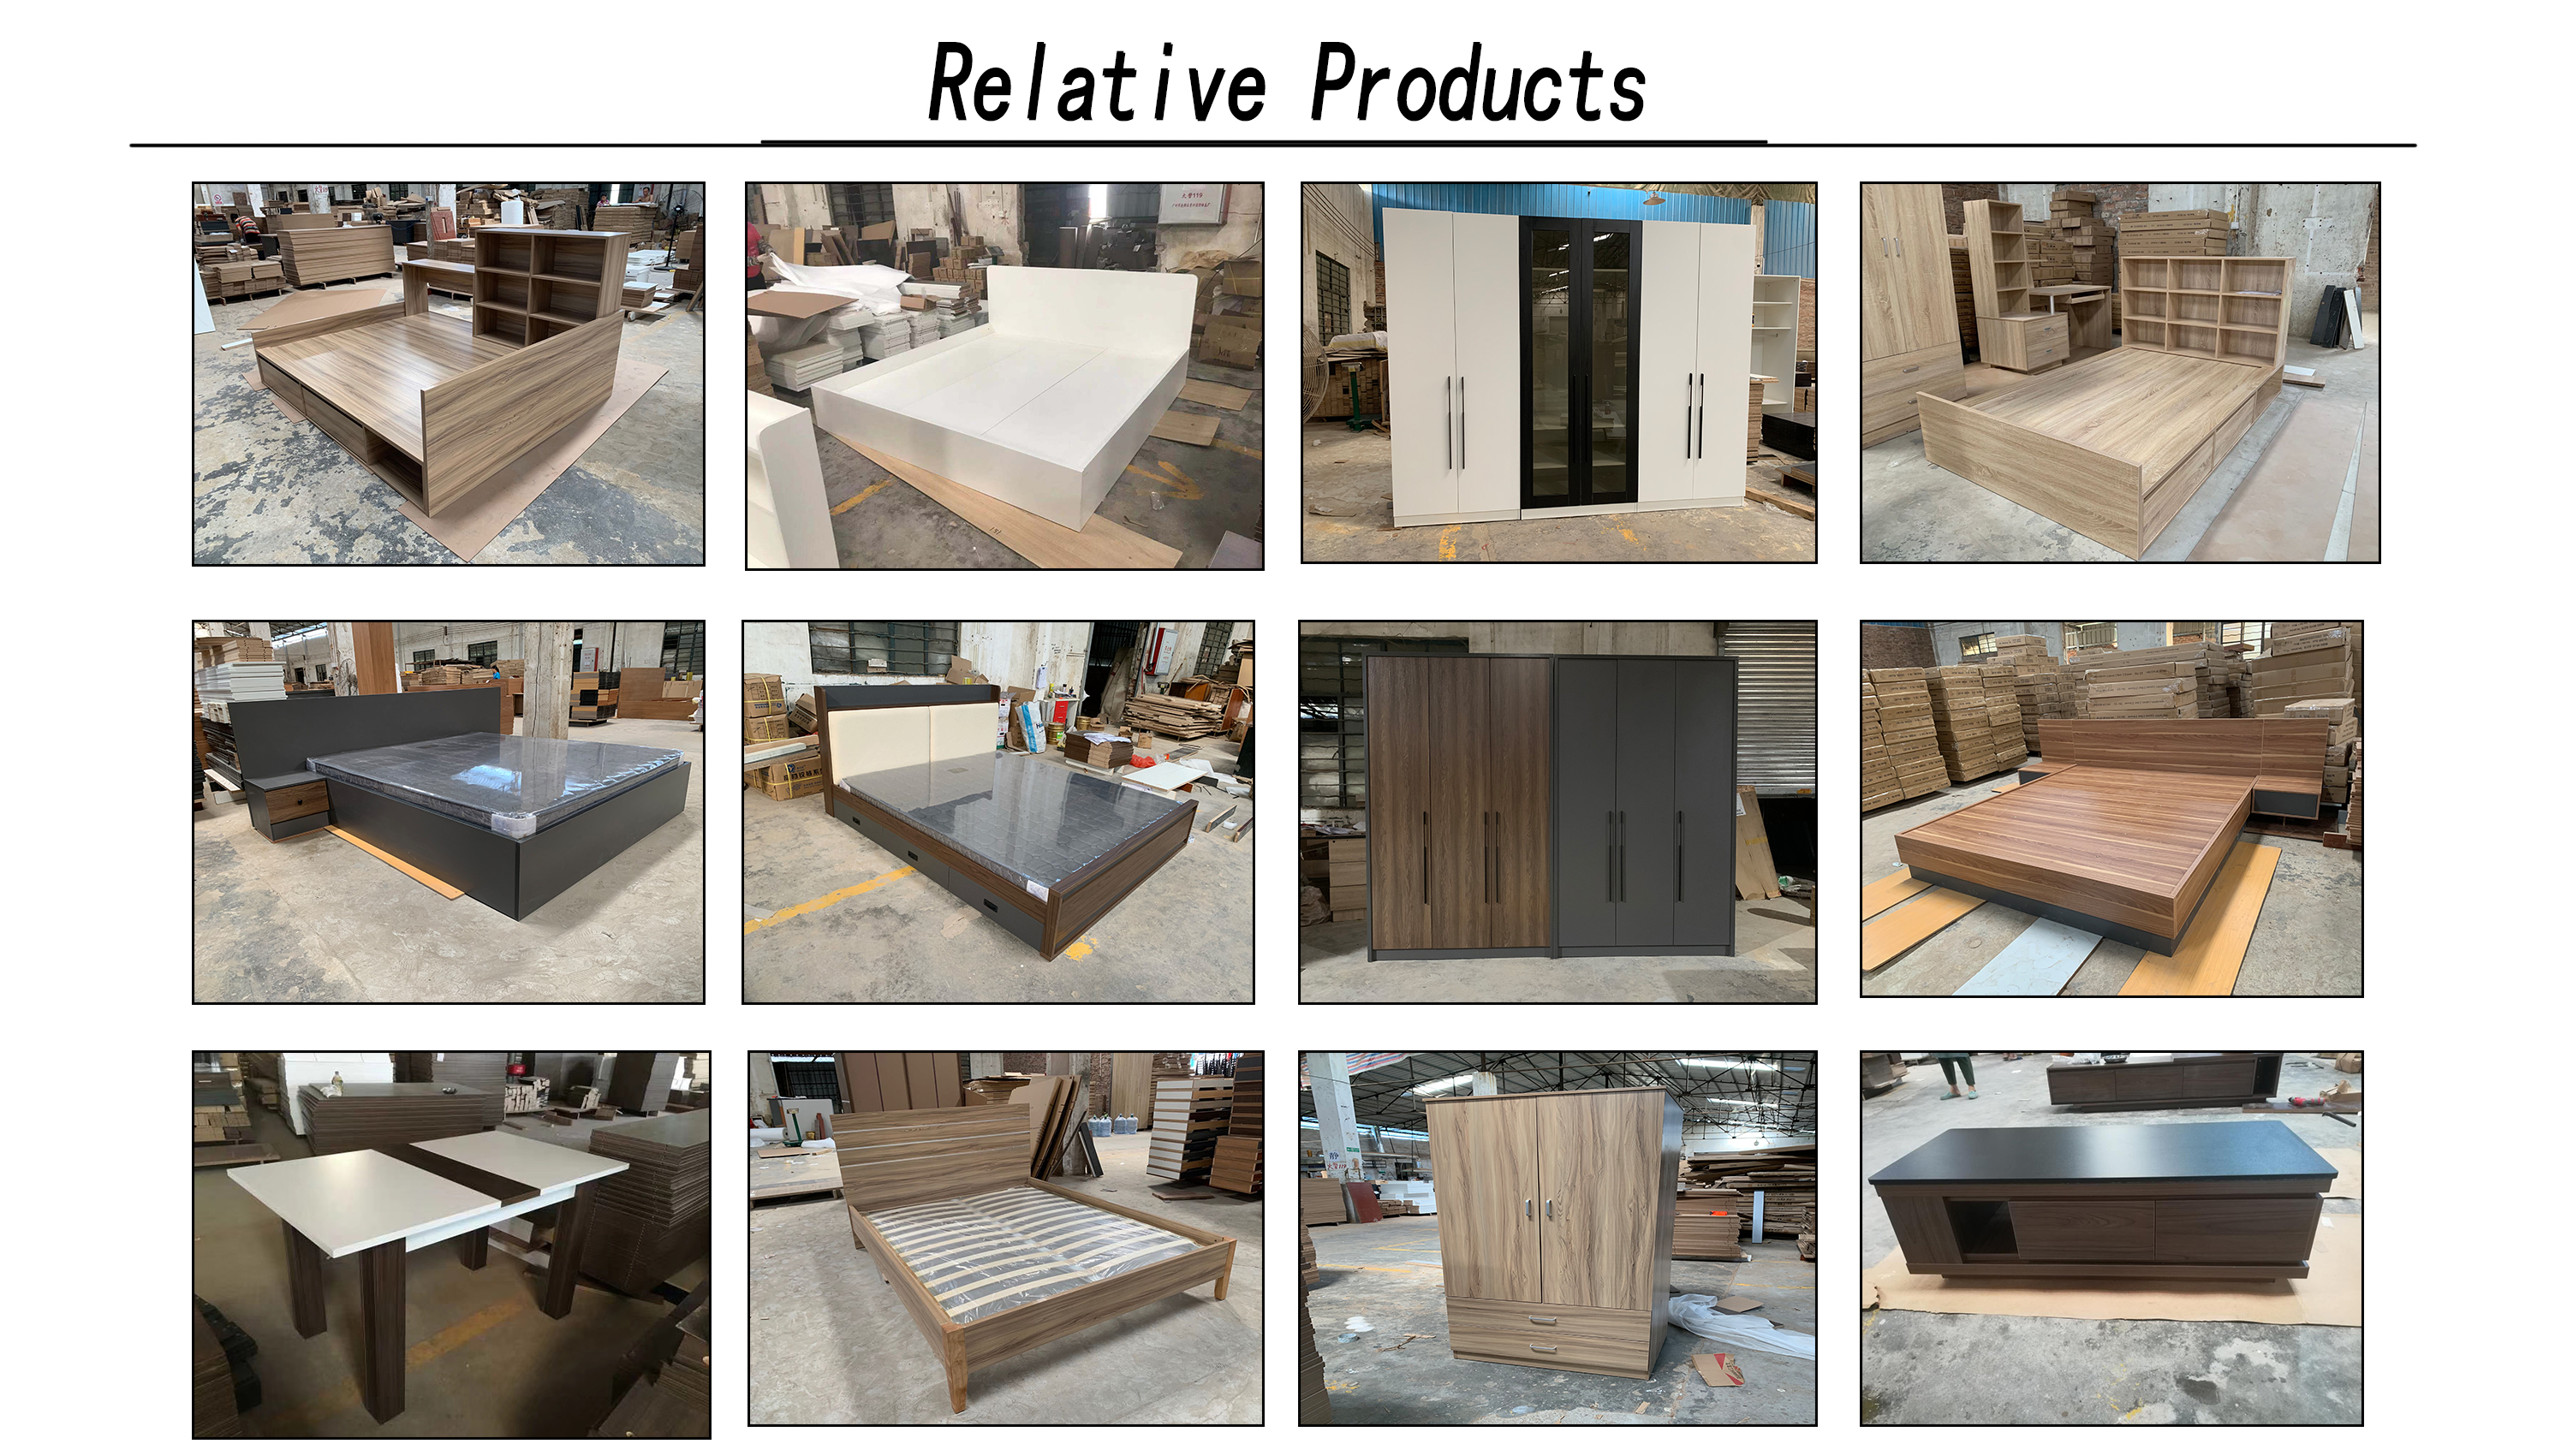 Relative Products(3)